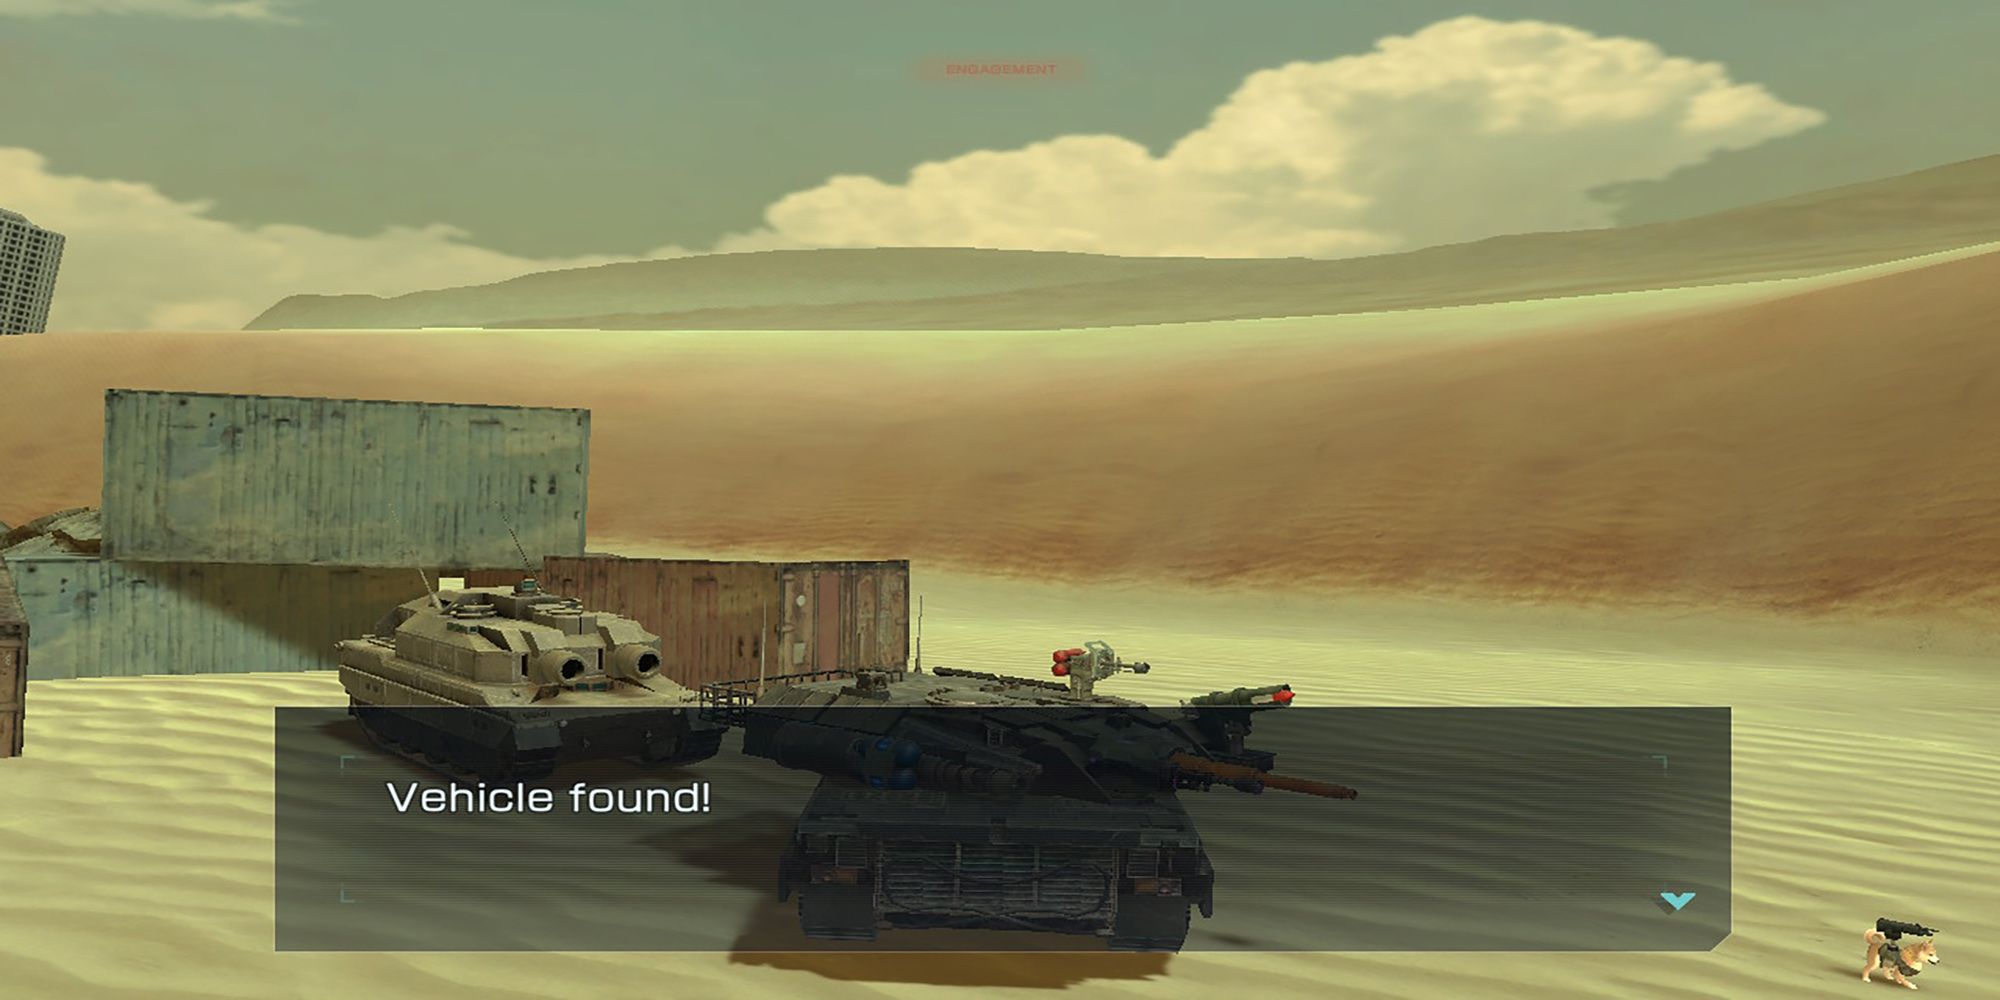 Talis uncovers the Bizonte-F vehicle near the Spider Gully in Metal Max Xeno Reborn.